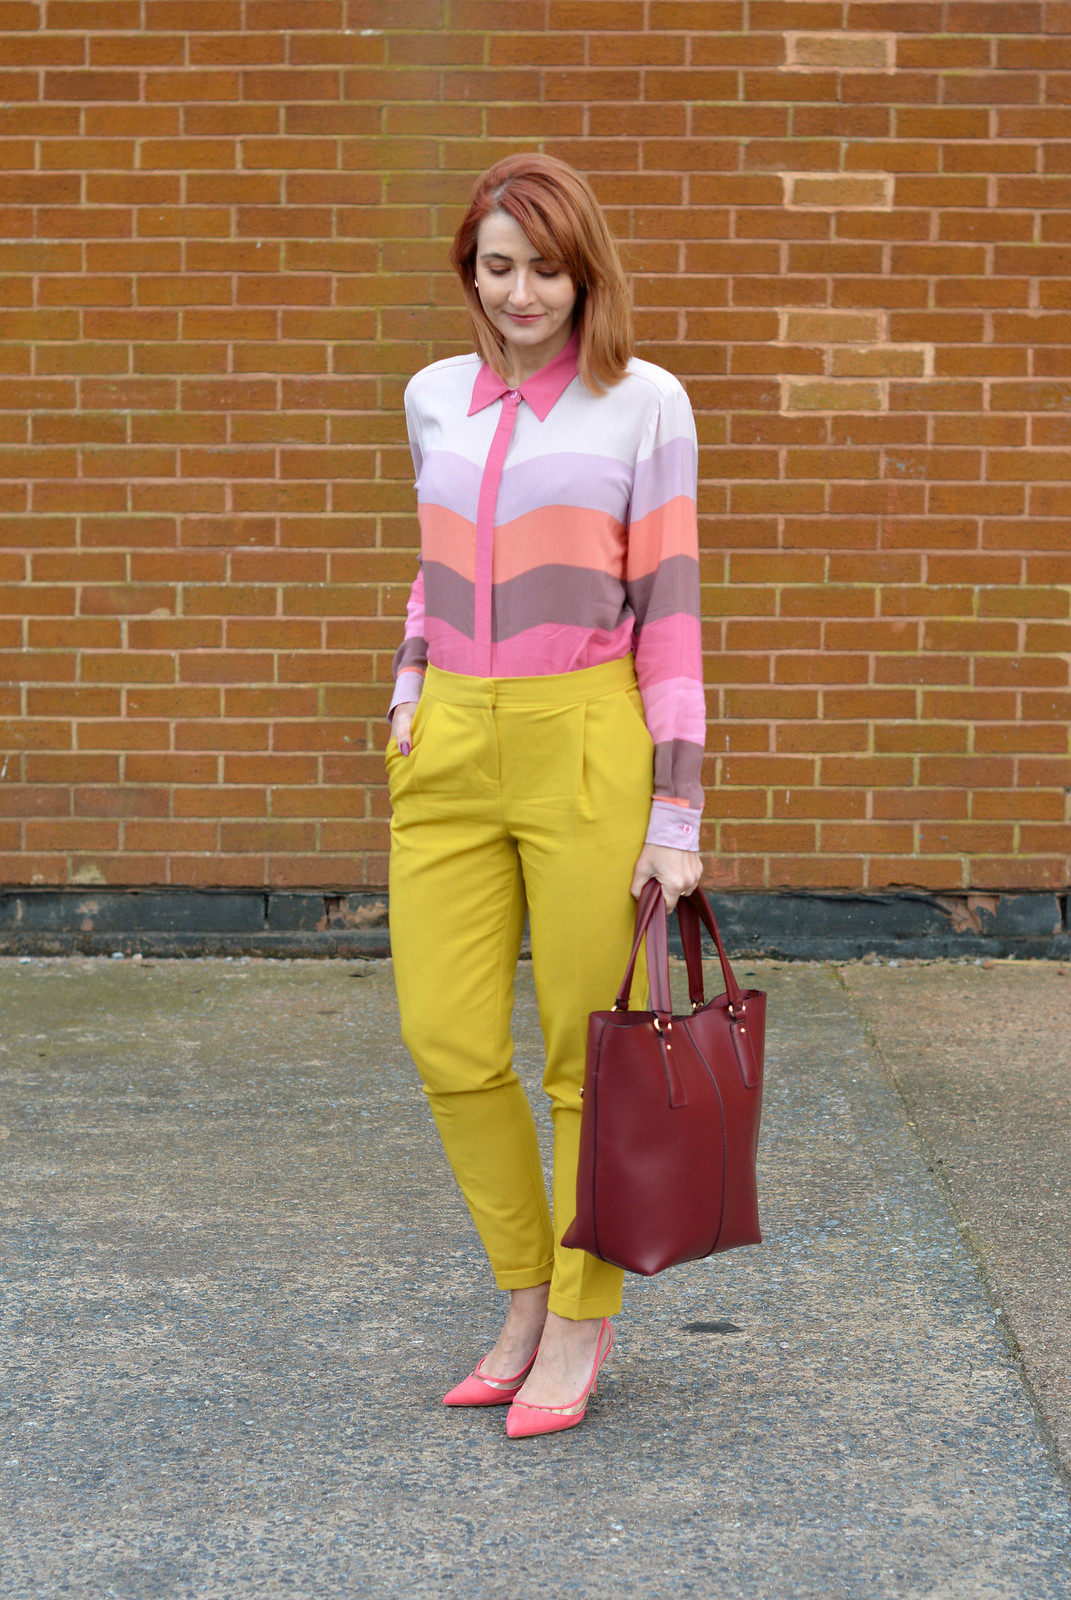 SS16 pastel bright stripes, mustard yellow trousers, coral heels | Not Dressed As Lamb